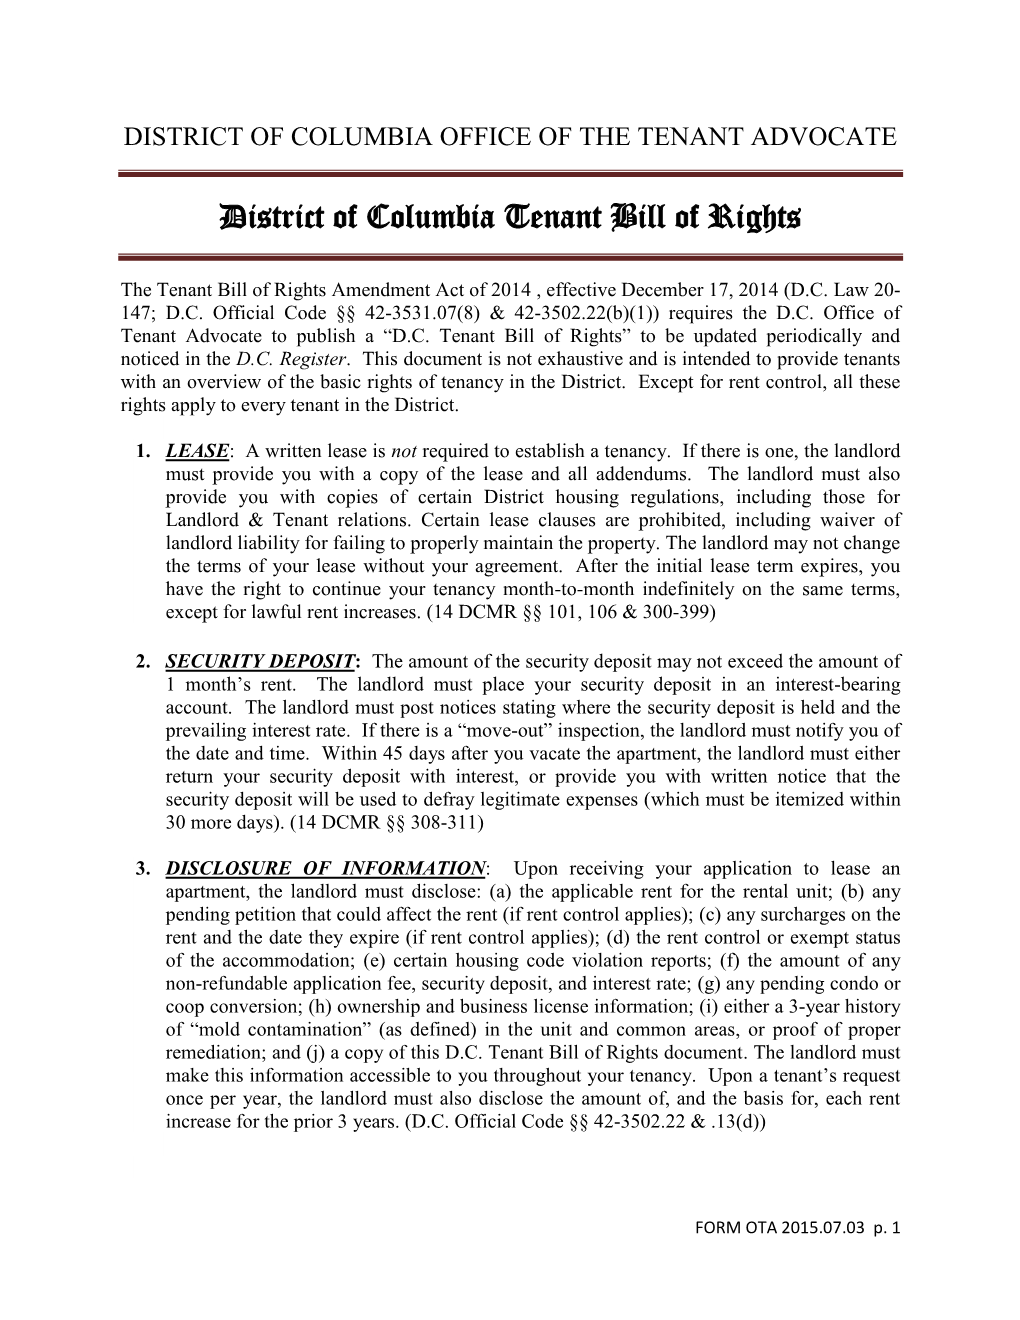 District of Columbia Tenant Bill of Rights